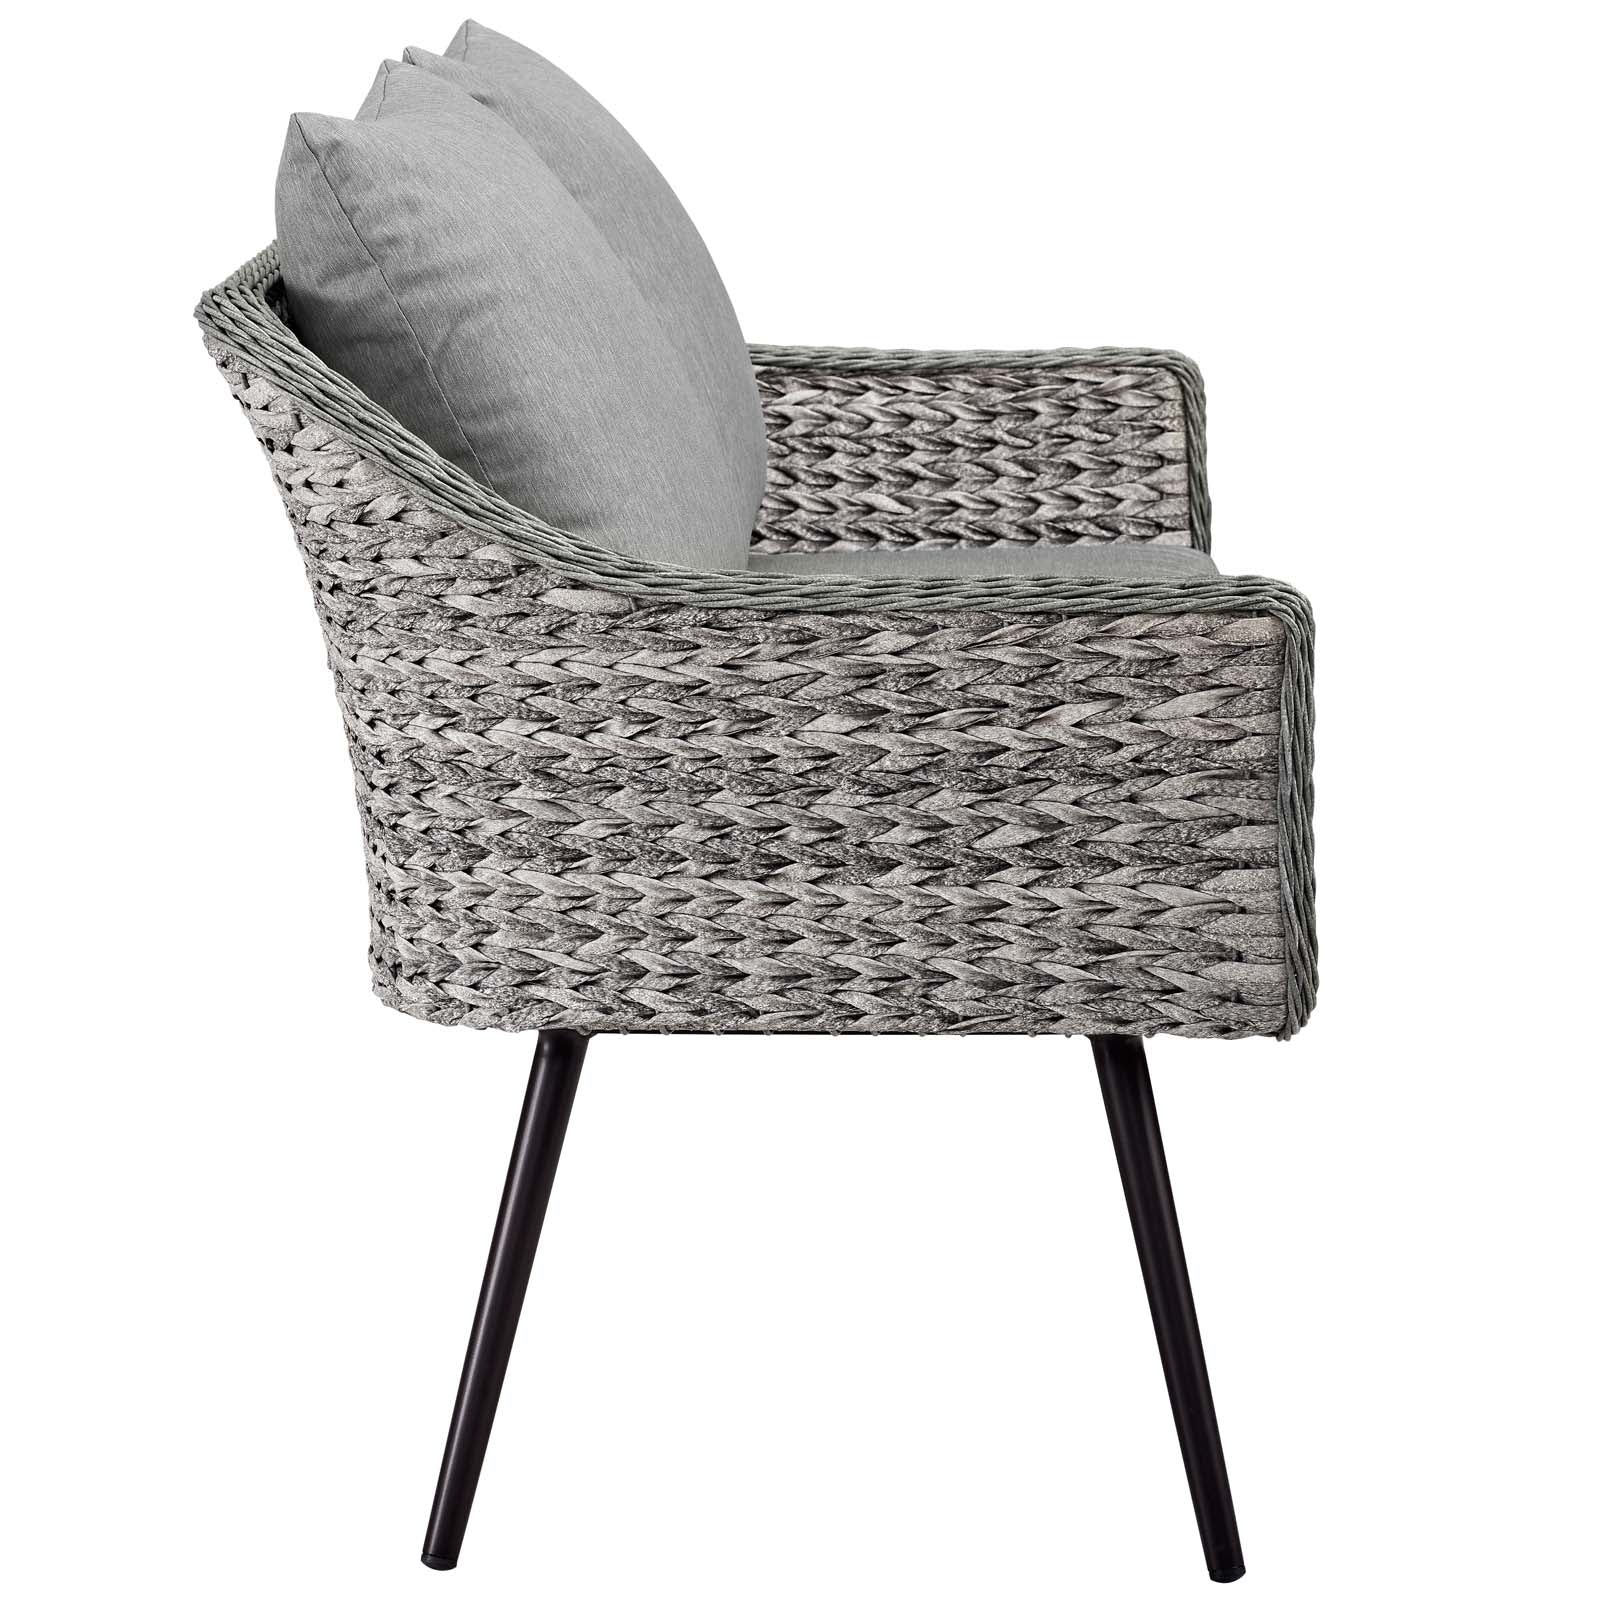 Endeavor 2 Piece Outdoor Patio Wicker Rattan Loveseat and Armchair Set - East Shore Modern Home Furnishings